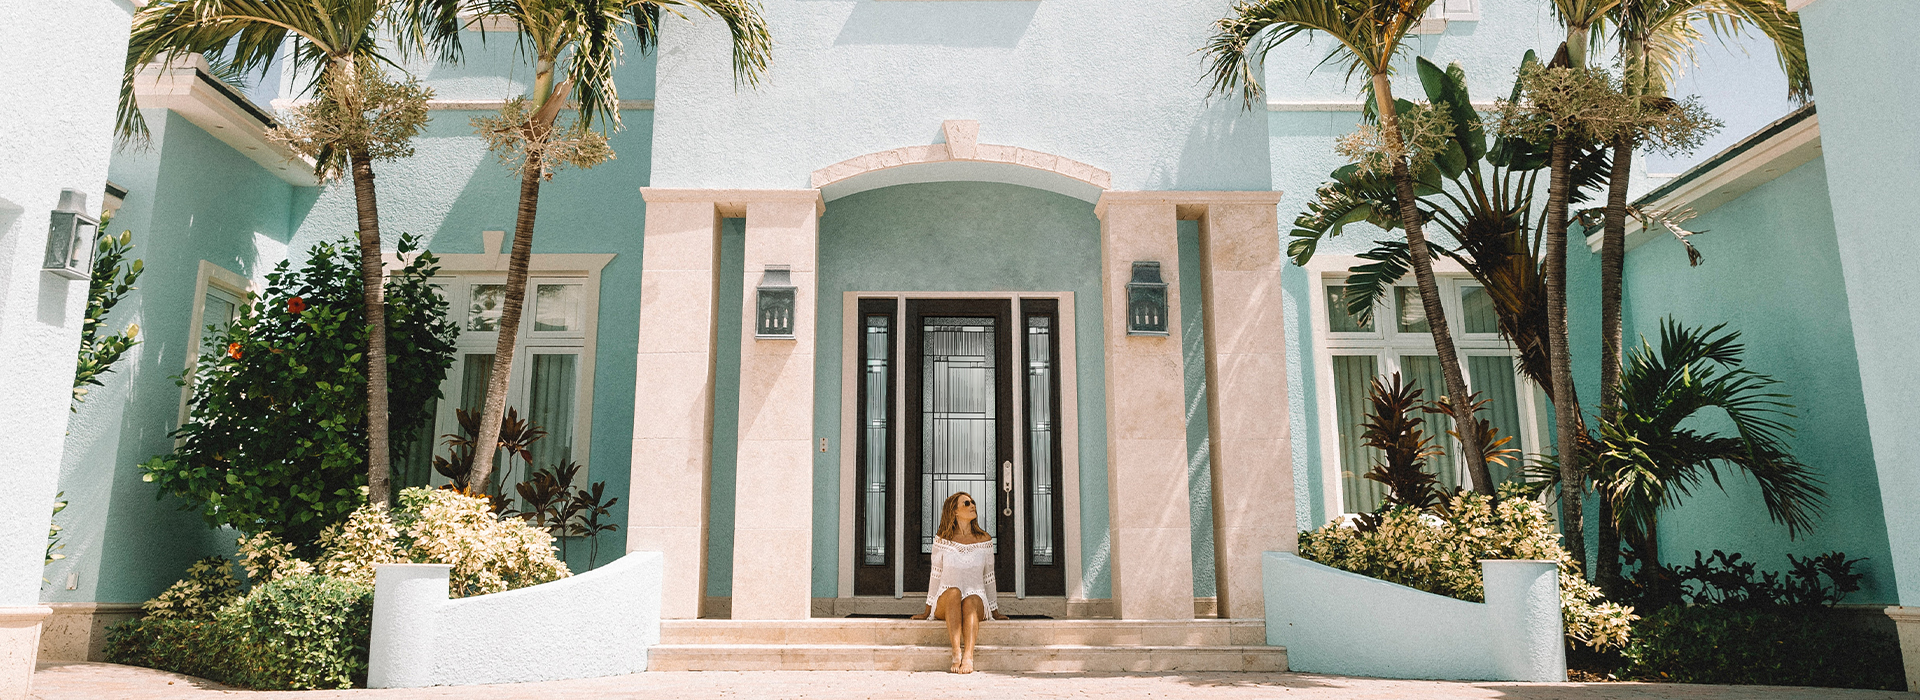 A woman in white dress is sitting at the front steps of a Mediterranean style home with a full light Bellville door with sidelites